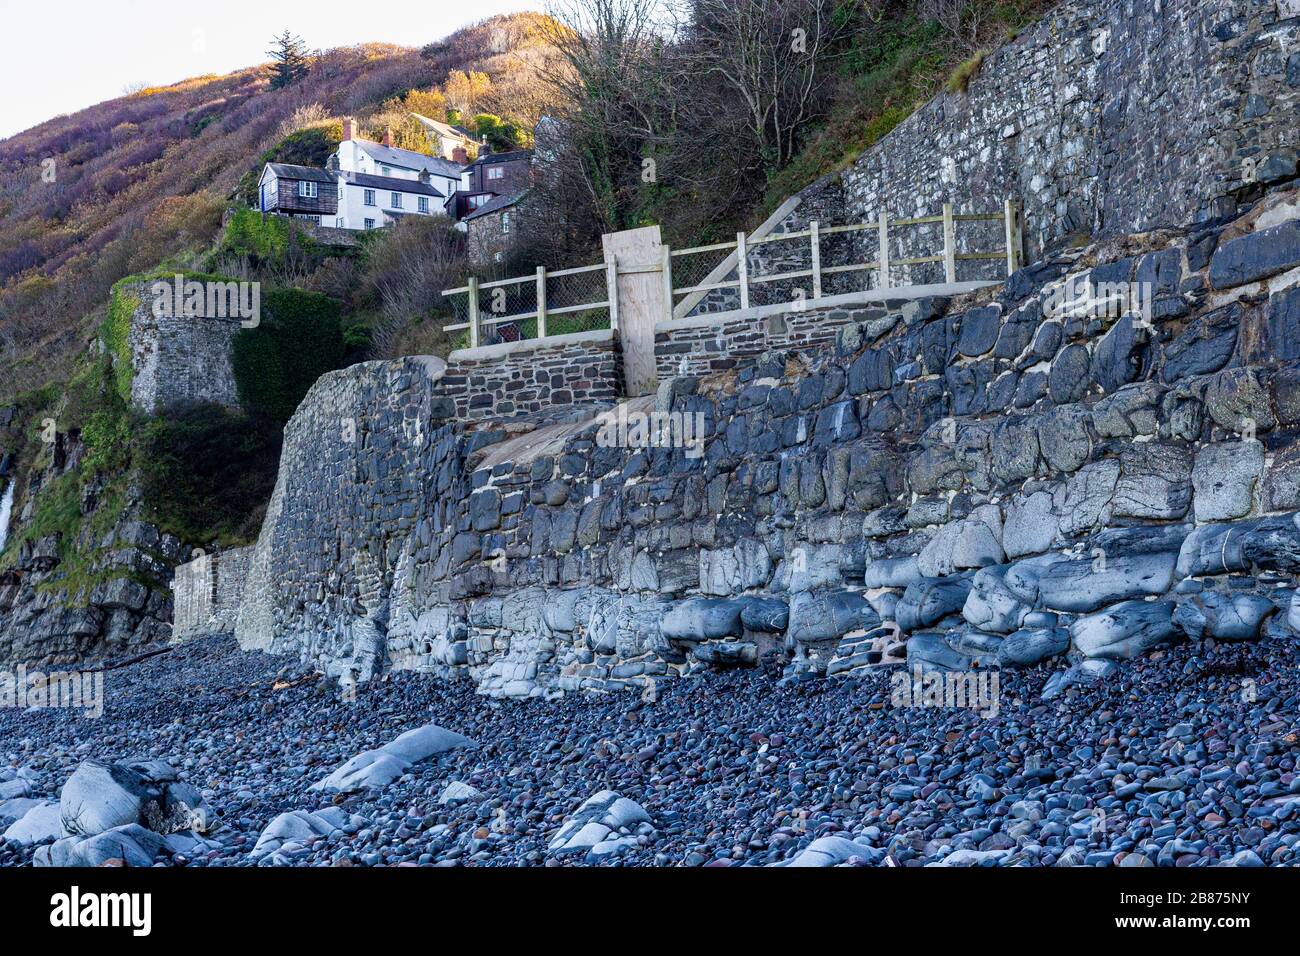 Bucks Mills Sea Wall and Lime Kiln View. Looking Inland with Cliff Top Houses and Detailed Defensive Stonework, on the North Devon Coast. Stock Photo